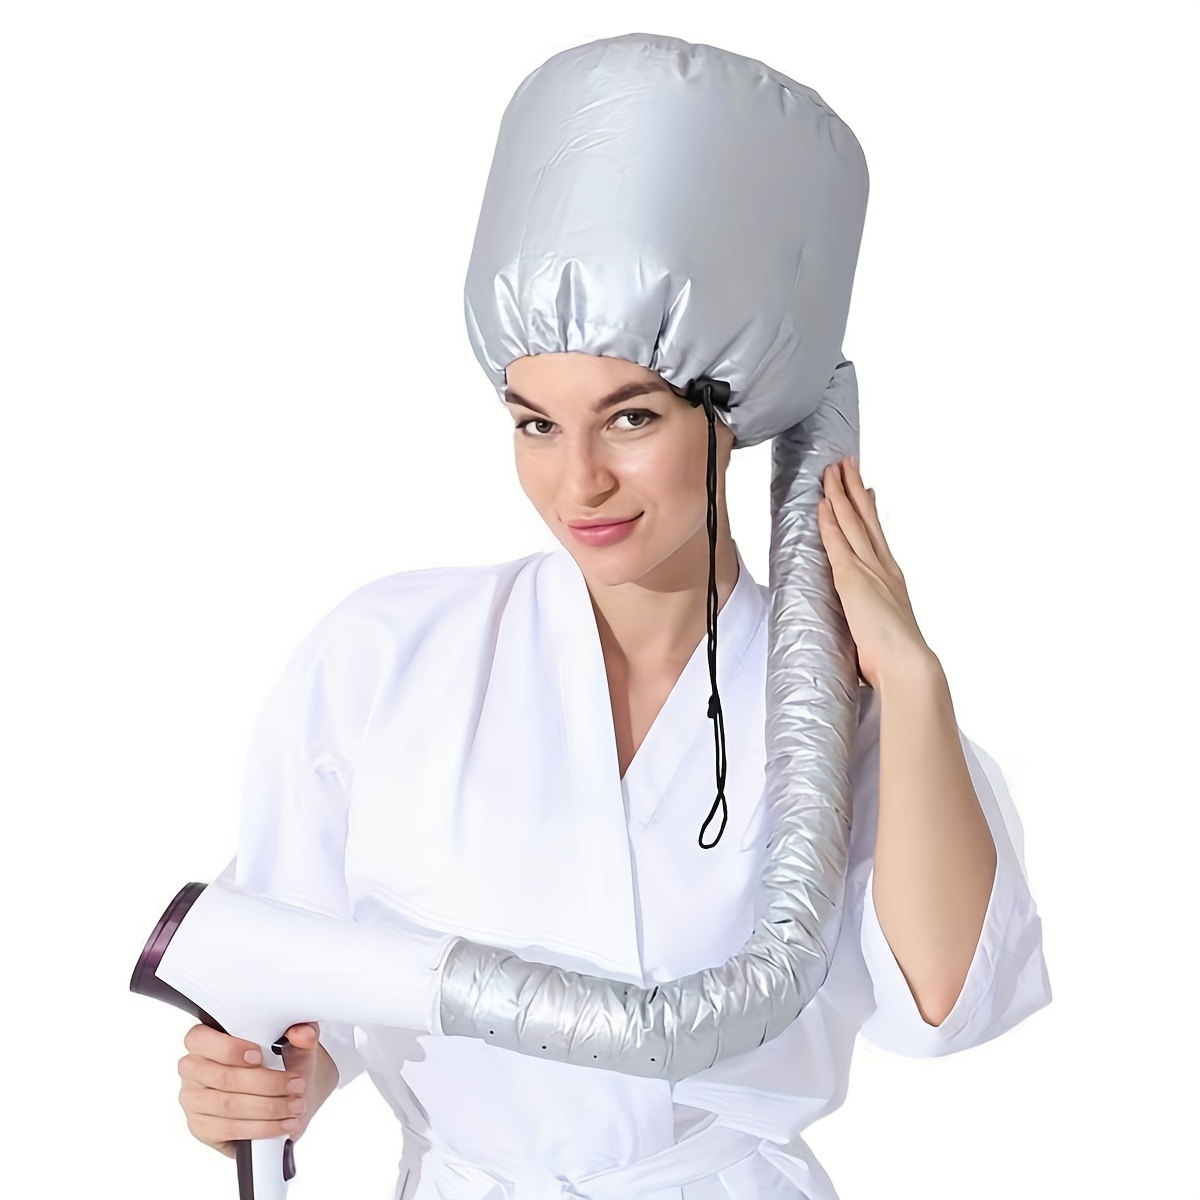 

Hair Dryer Bonnet Adjustable Soft Hood Hair Drying Hood For Hair Styling, Curling, Deep Conditioning Portable Hair Dryer Fits All Head Hair Sizes